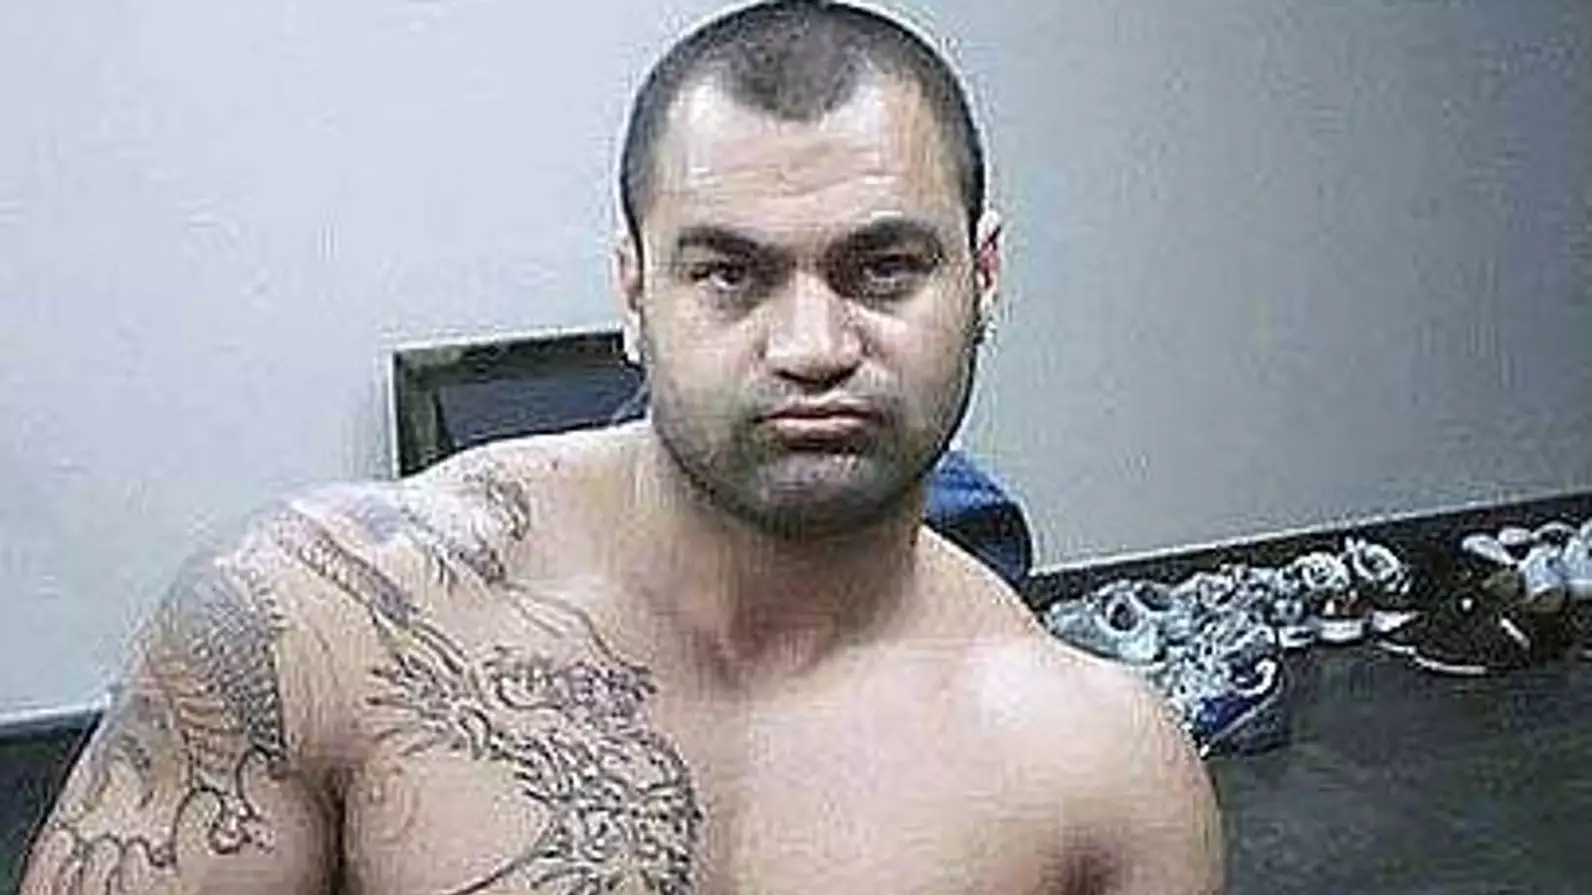 One Of Australia’s Most Wanted Men Won’t Hand Himself In, According To Crime Expert